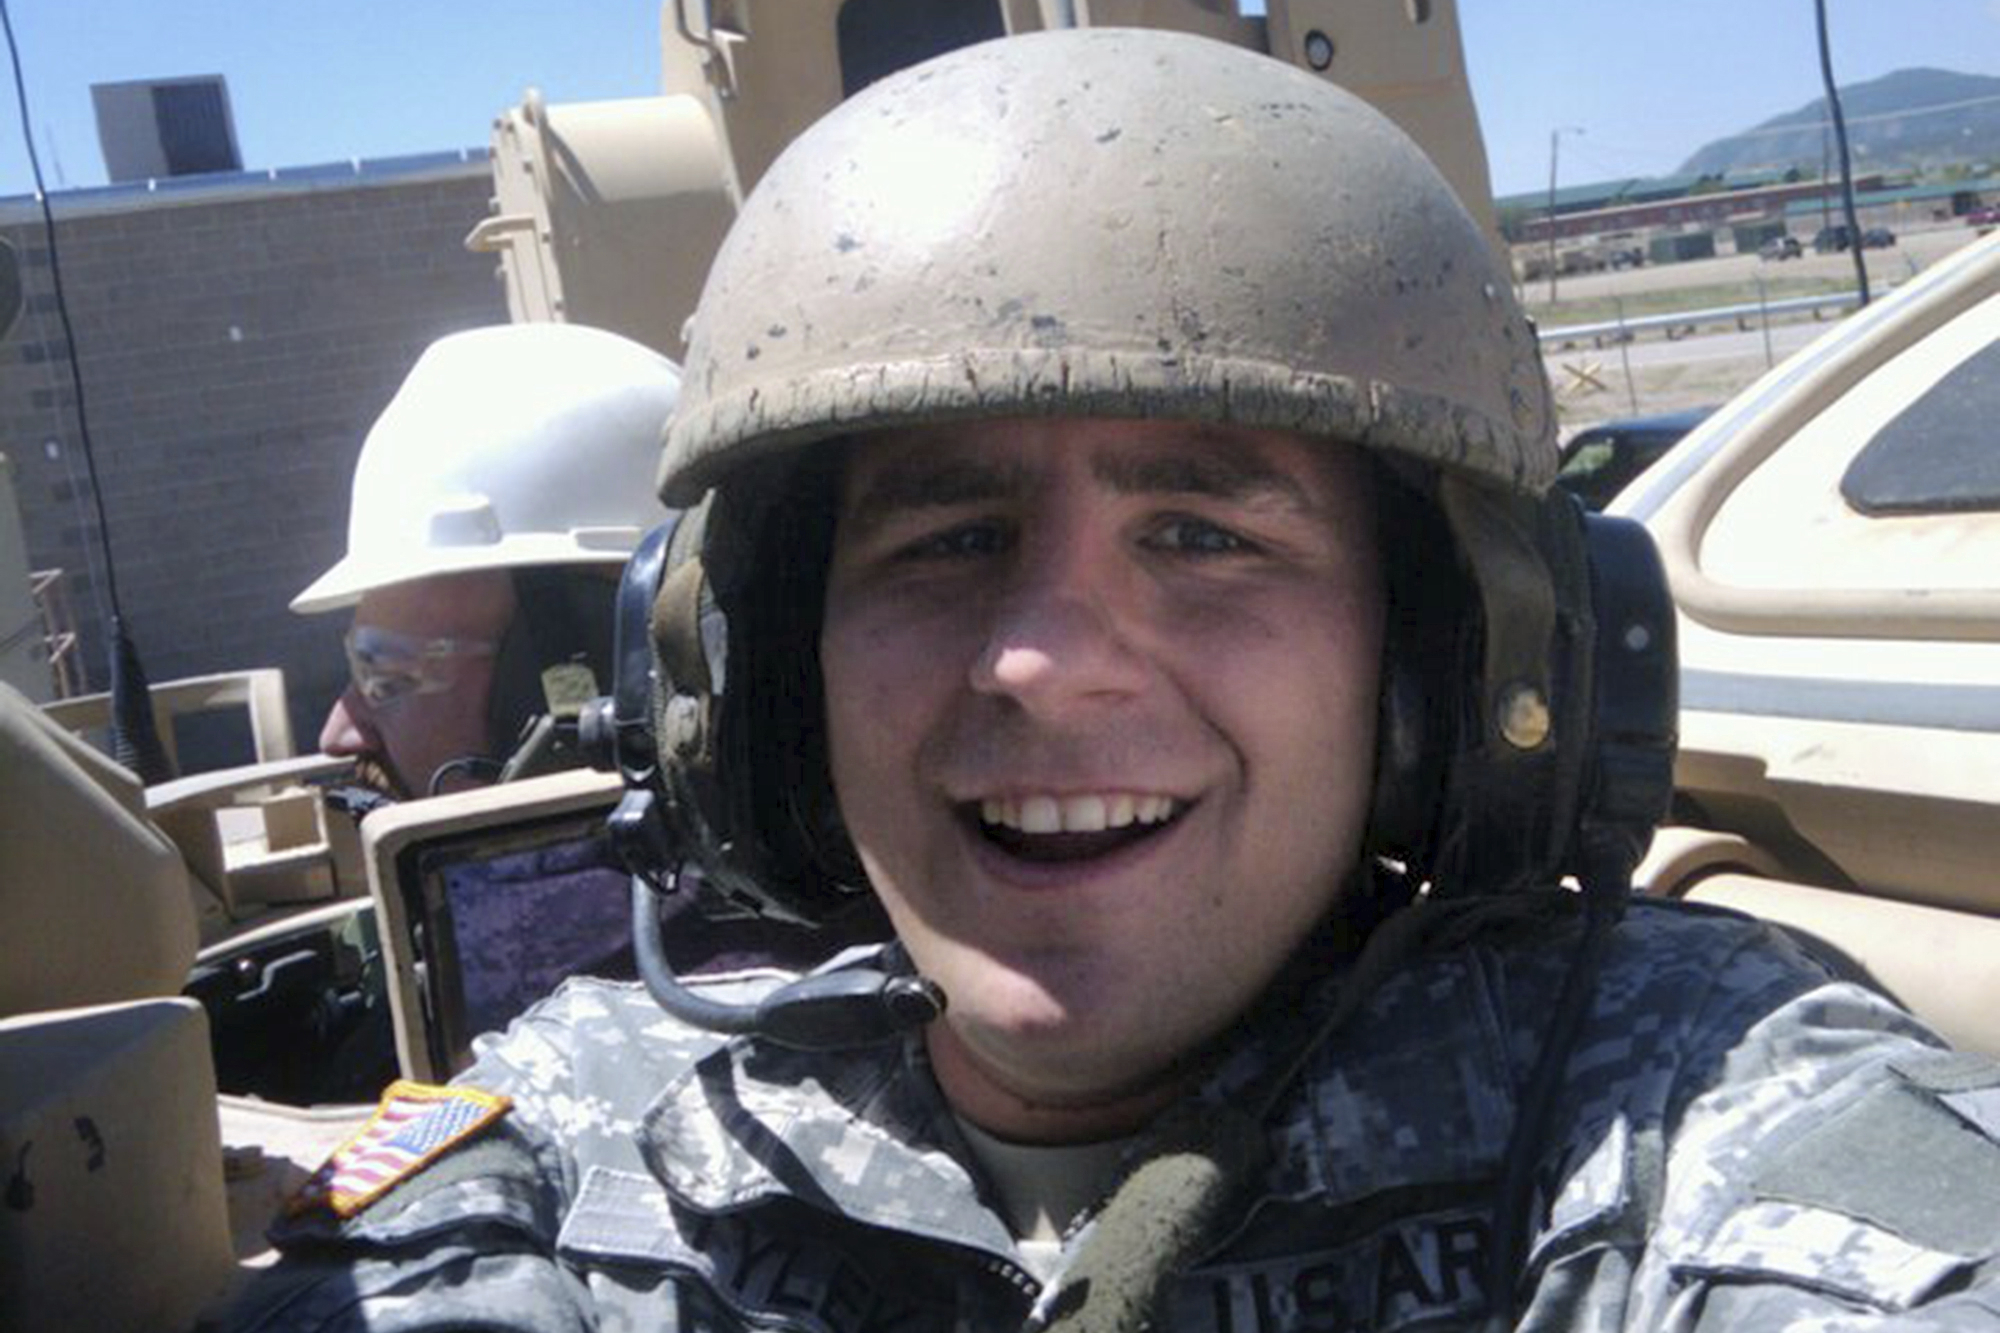 This photo provided by Casey Tylek shows him serving in the U.S. Army in Fort Carson Colo., in 2010. (Casey Tylek via AP)